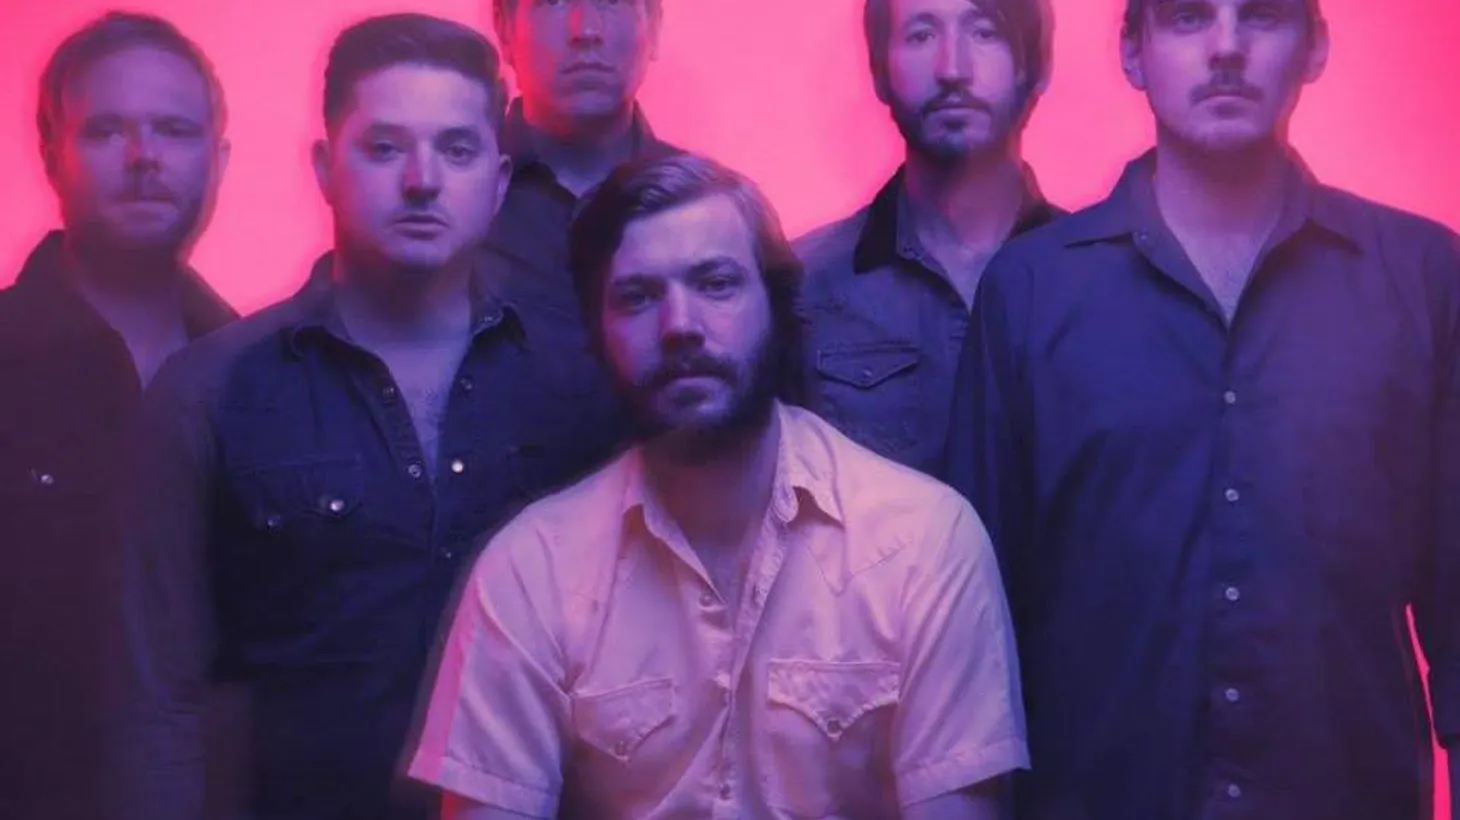 Midlake decided to stay together after the departure of their lead singer, which proved to be a wise choice.